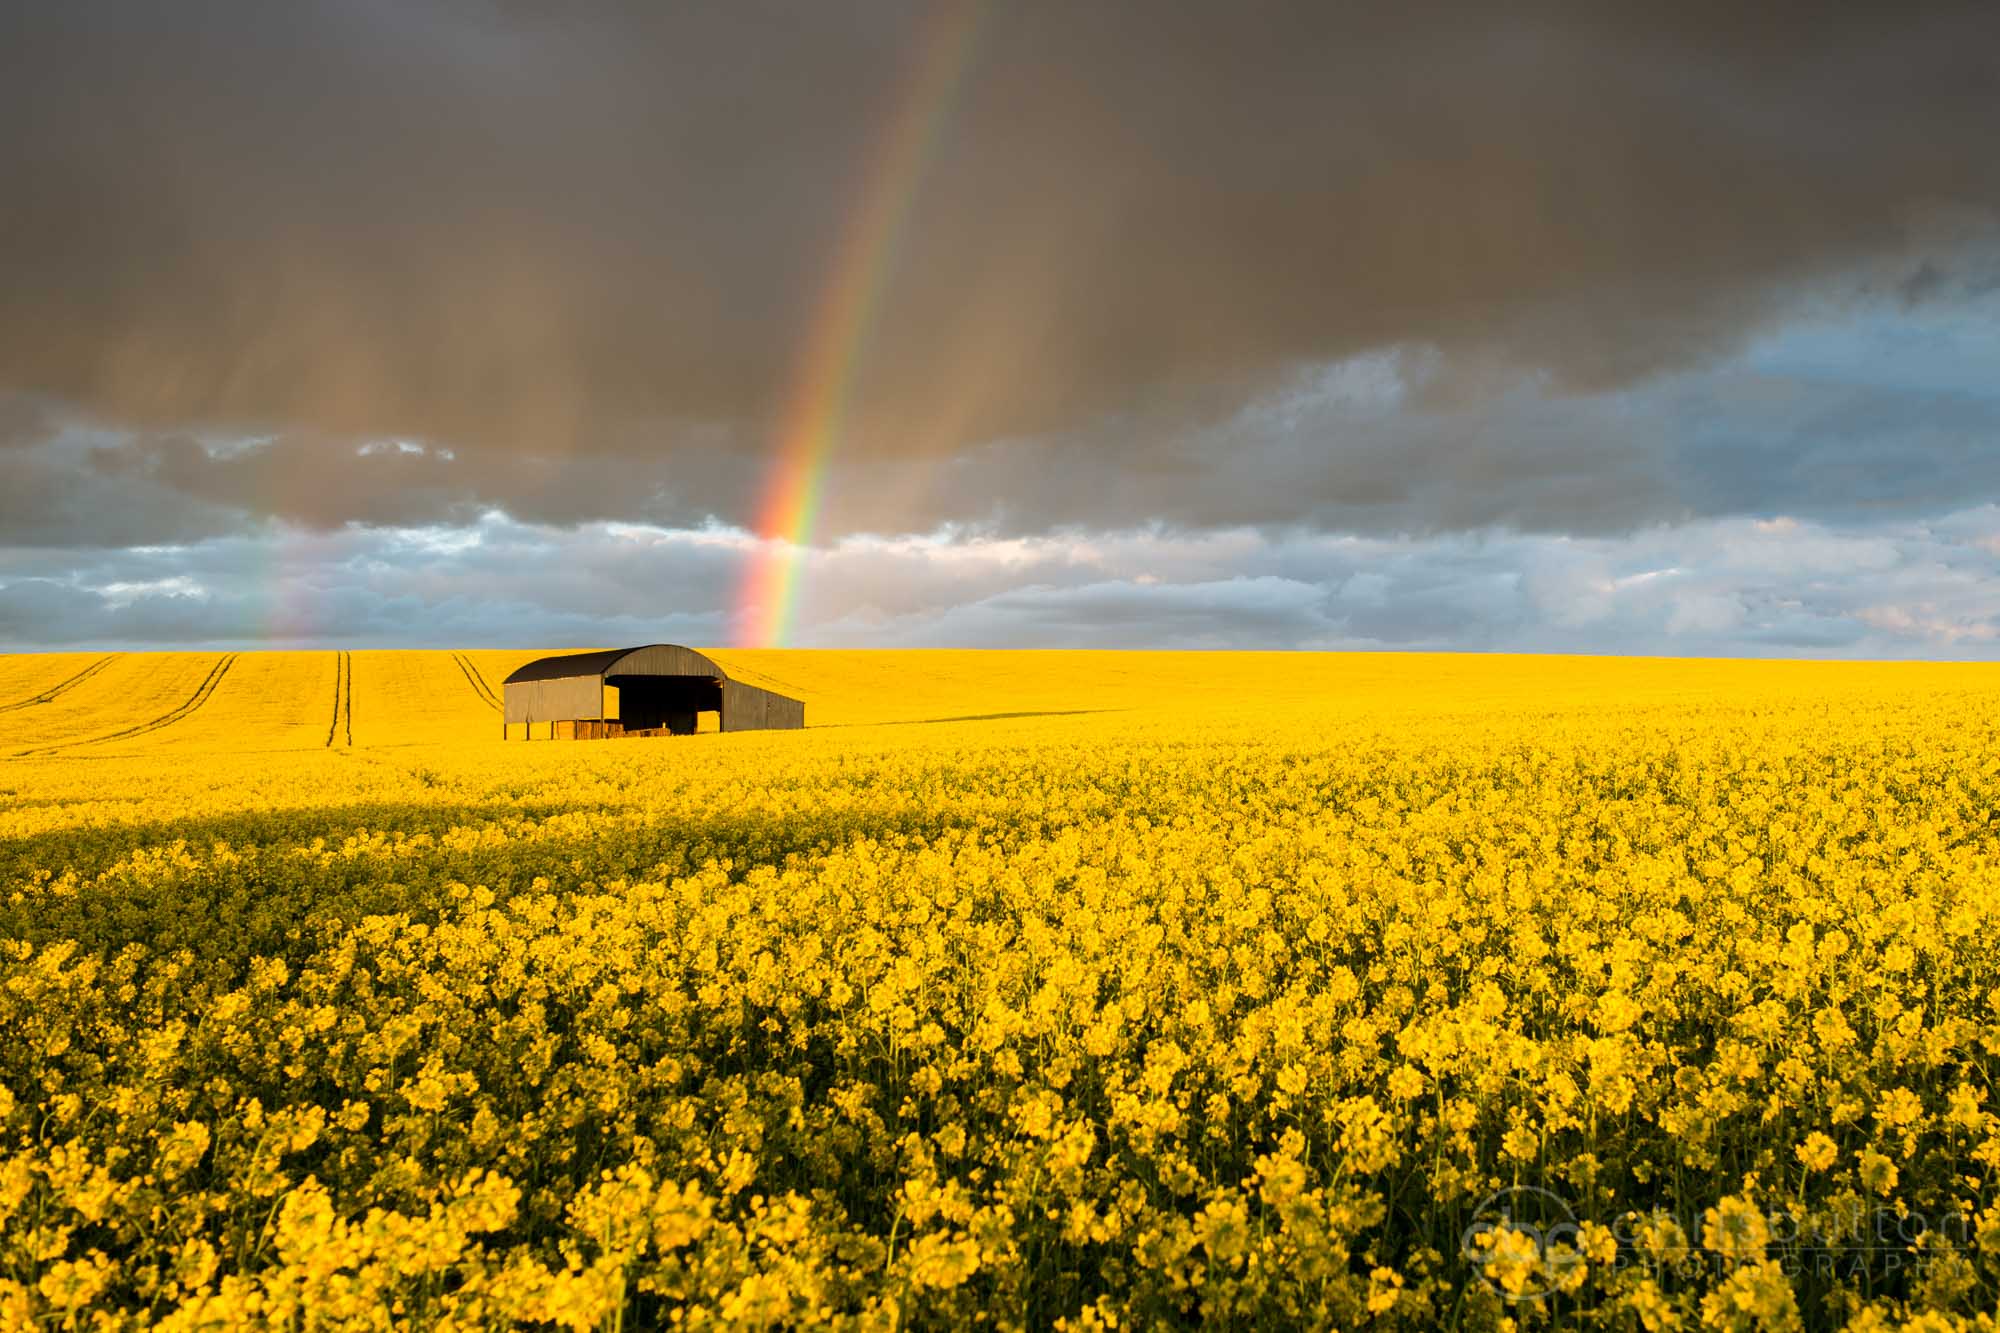 Rainbow over Rapeseed Field by Chris Button